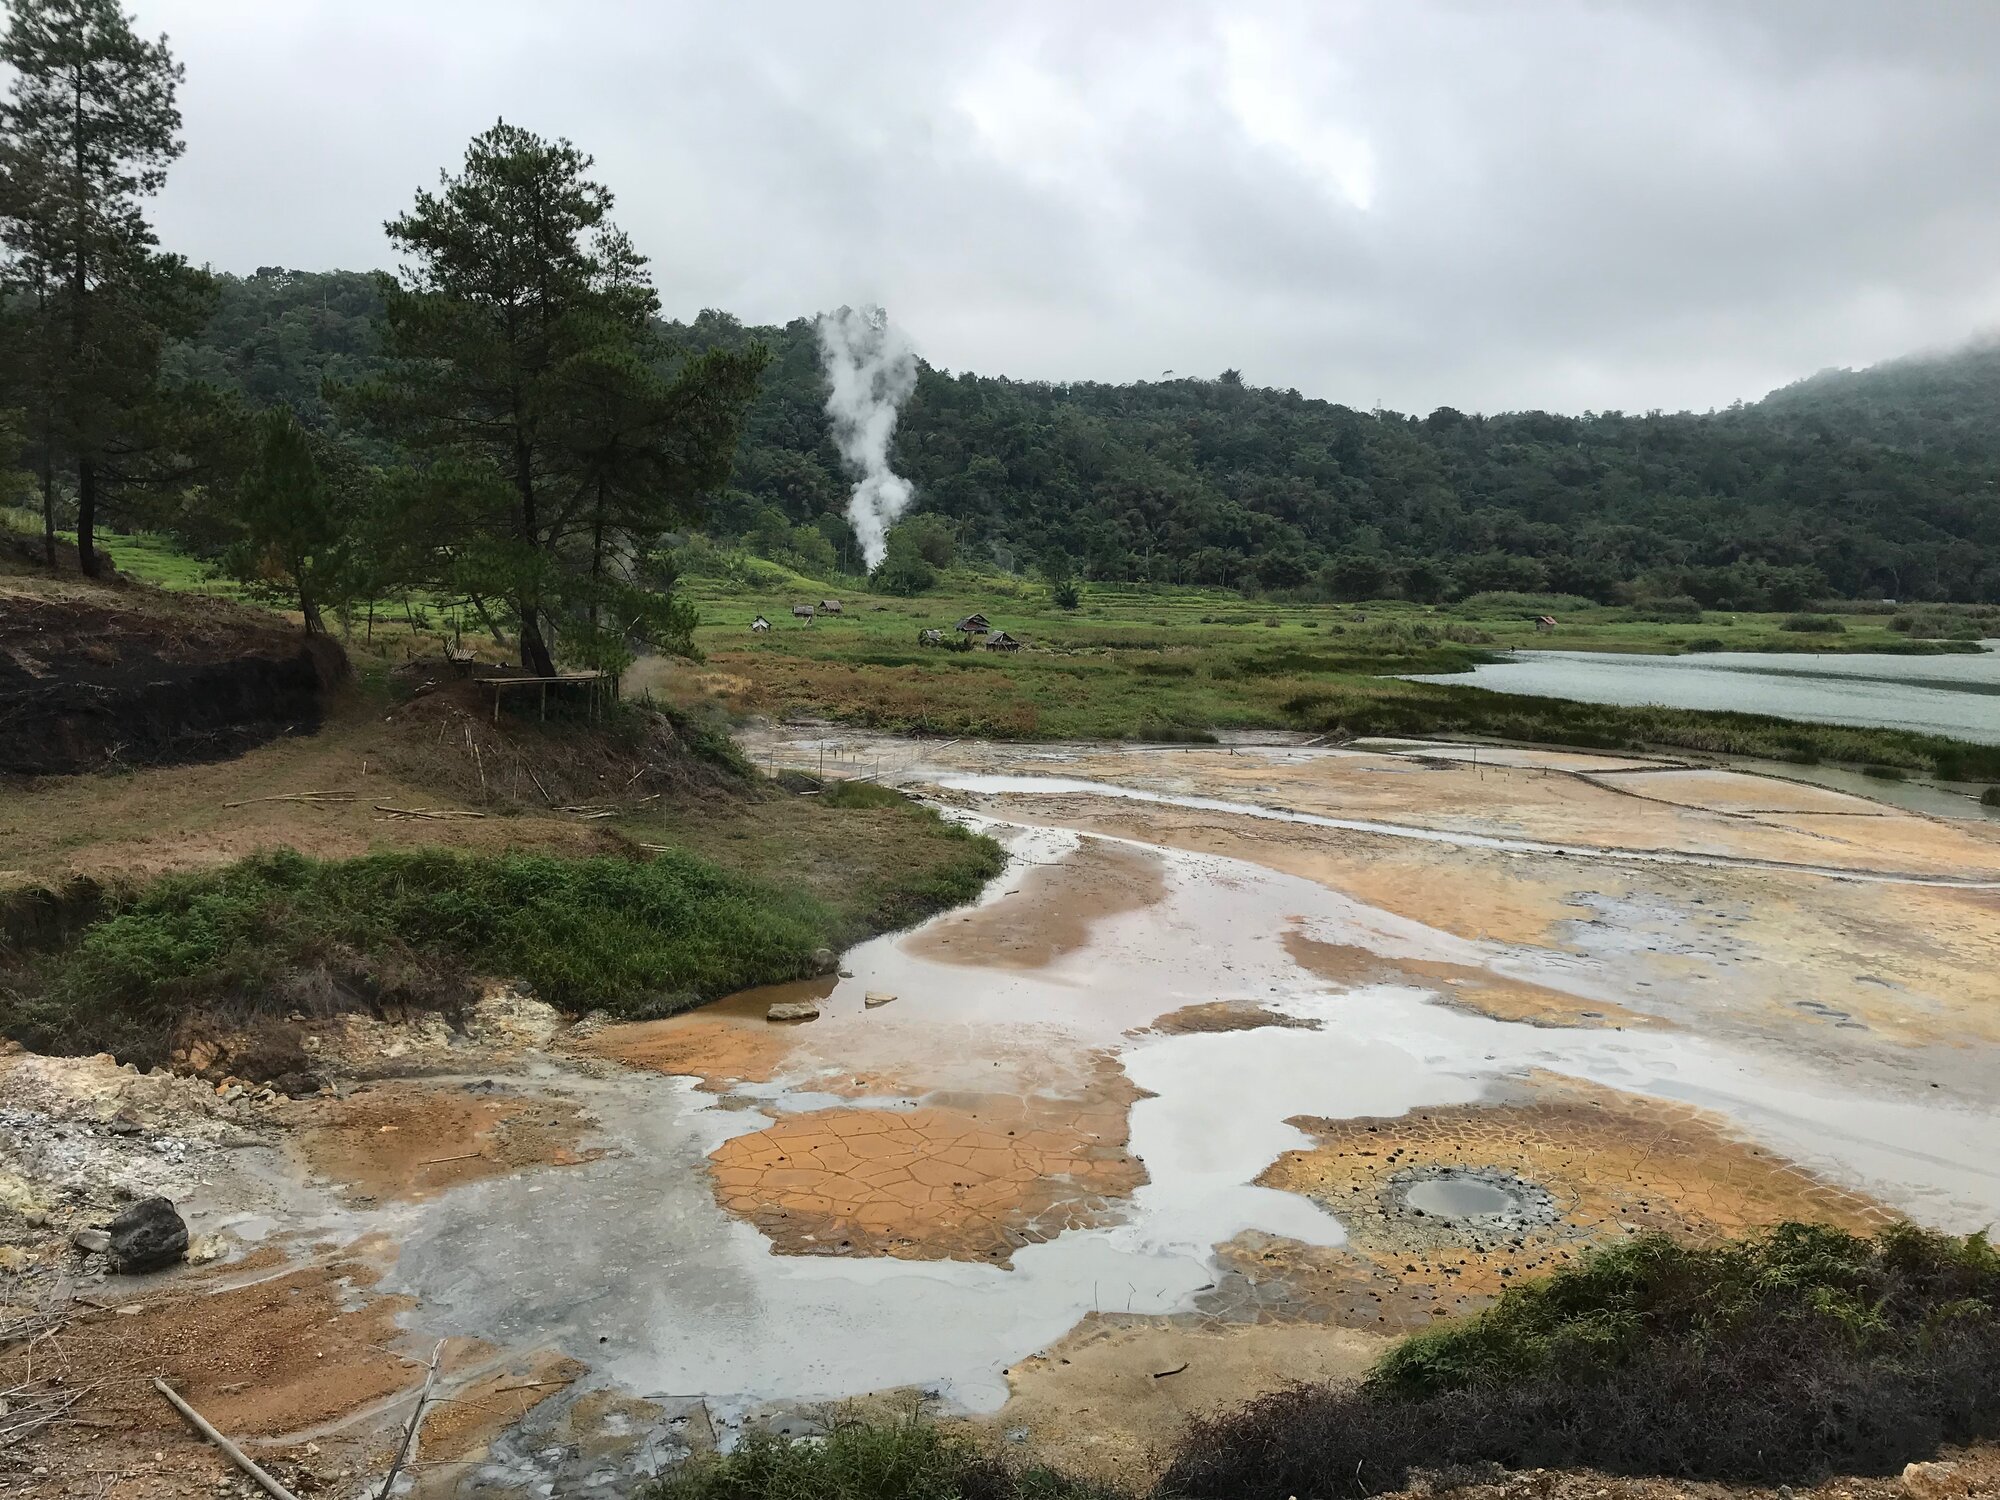 Sulawesi: Sulphur springs as a sign of volcanic activity